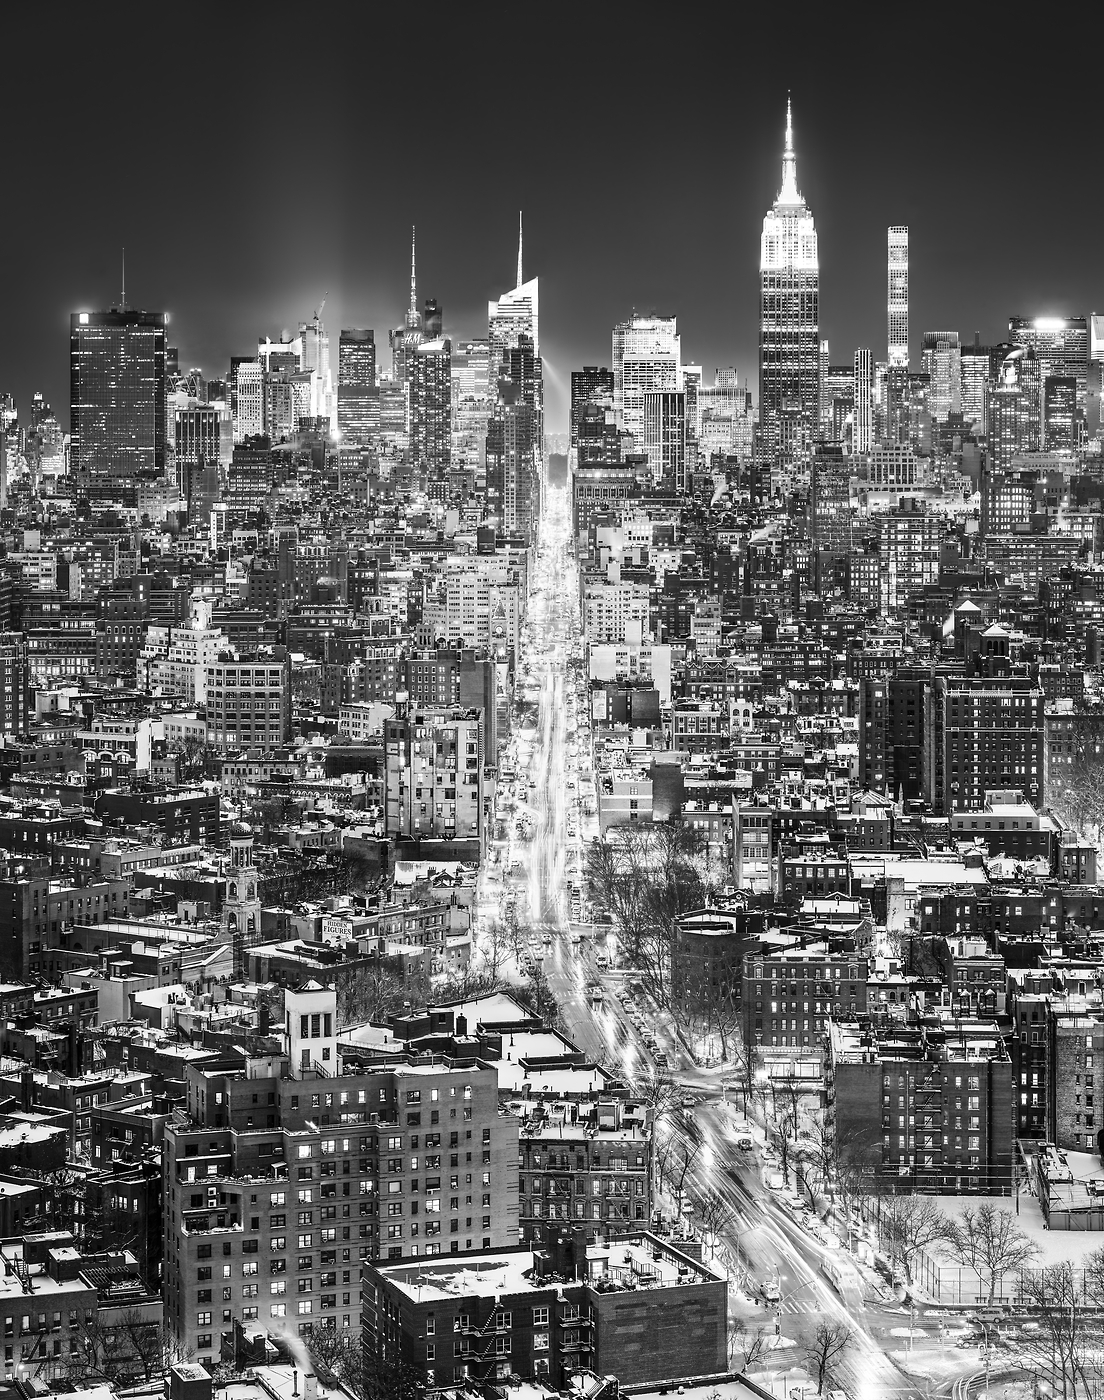 1,571 megapixels! A very high resolution, large-format VAST photo print of the Manhattan NYC skyline in winter snow at night; black and white cityscape fine art photo created by Dan Piech in New York City.